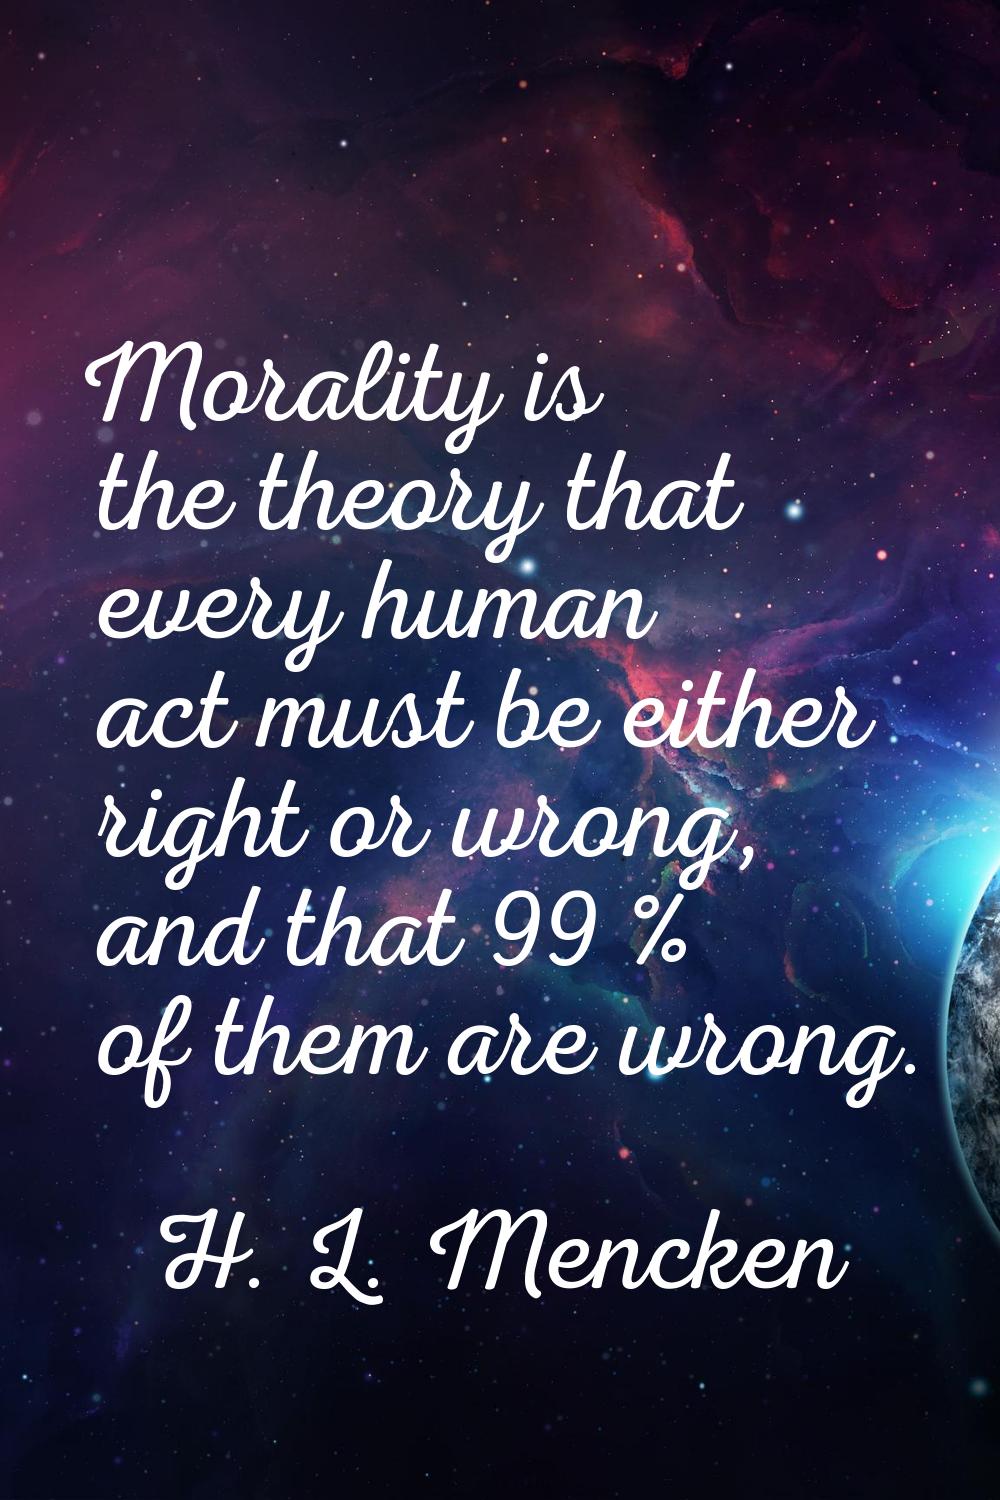 Morality is the theory that every human act must be either right or wrong, and that 99 % of them ar